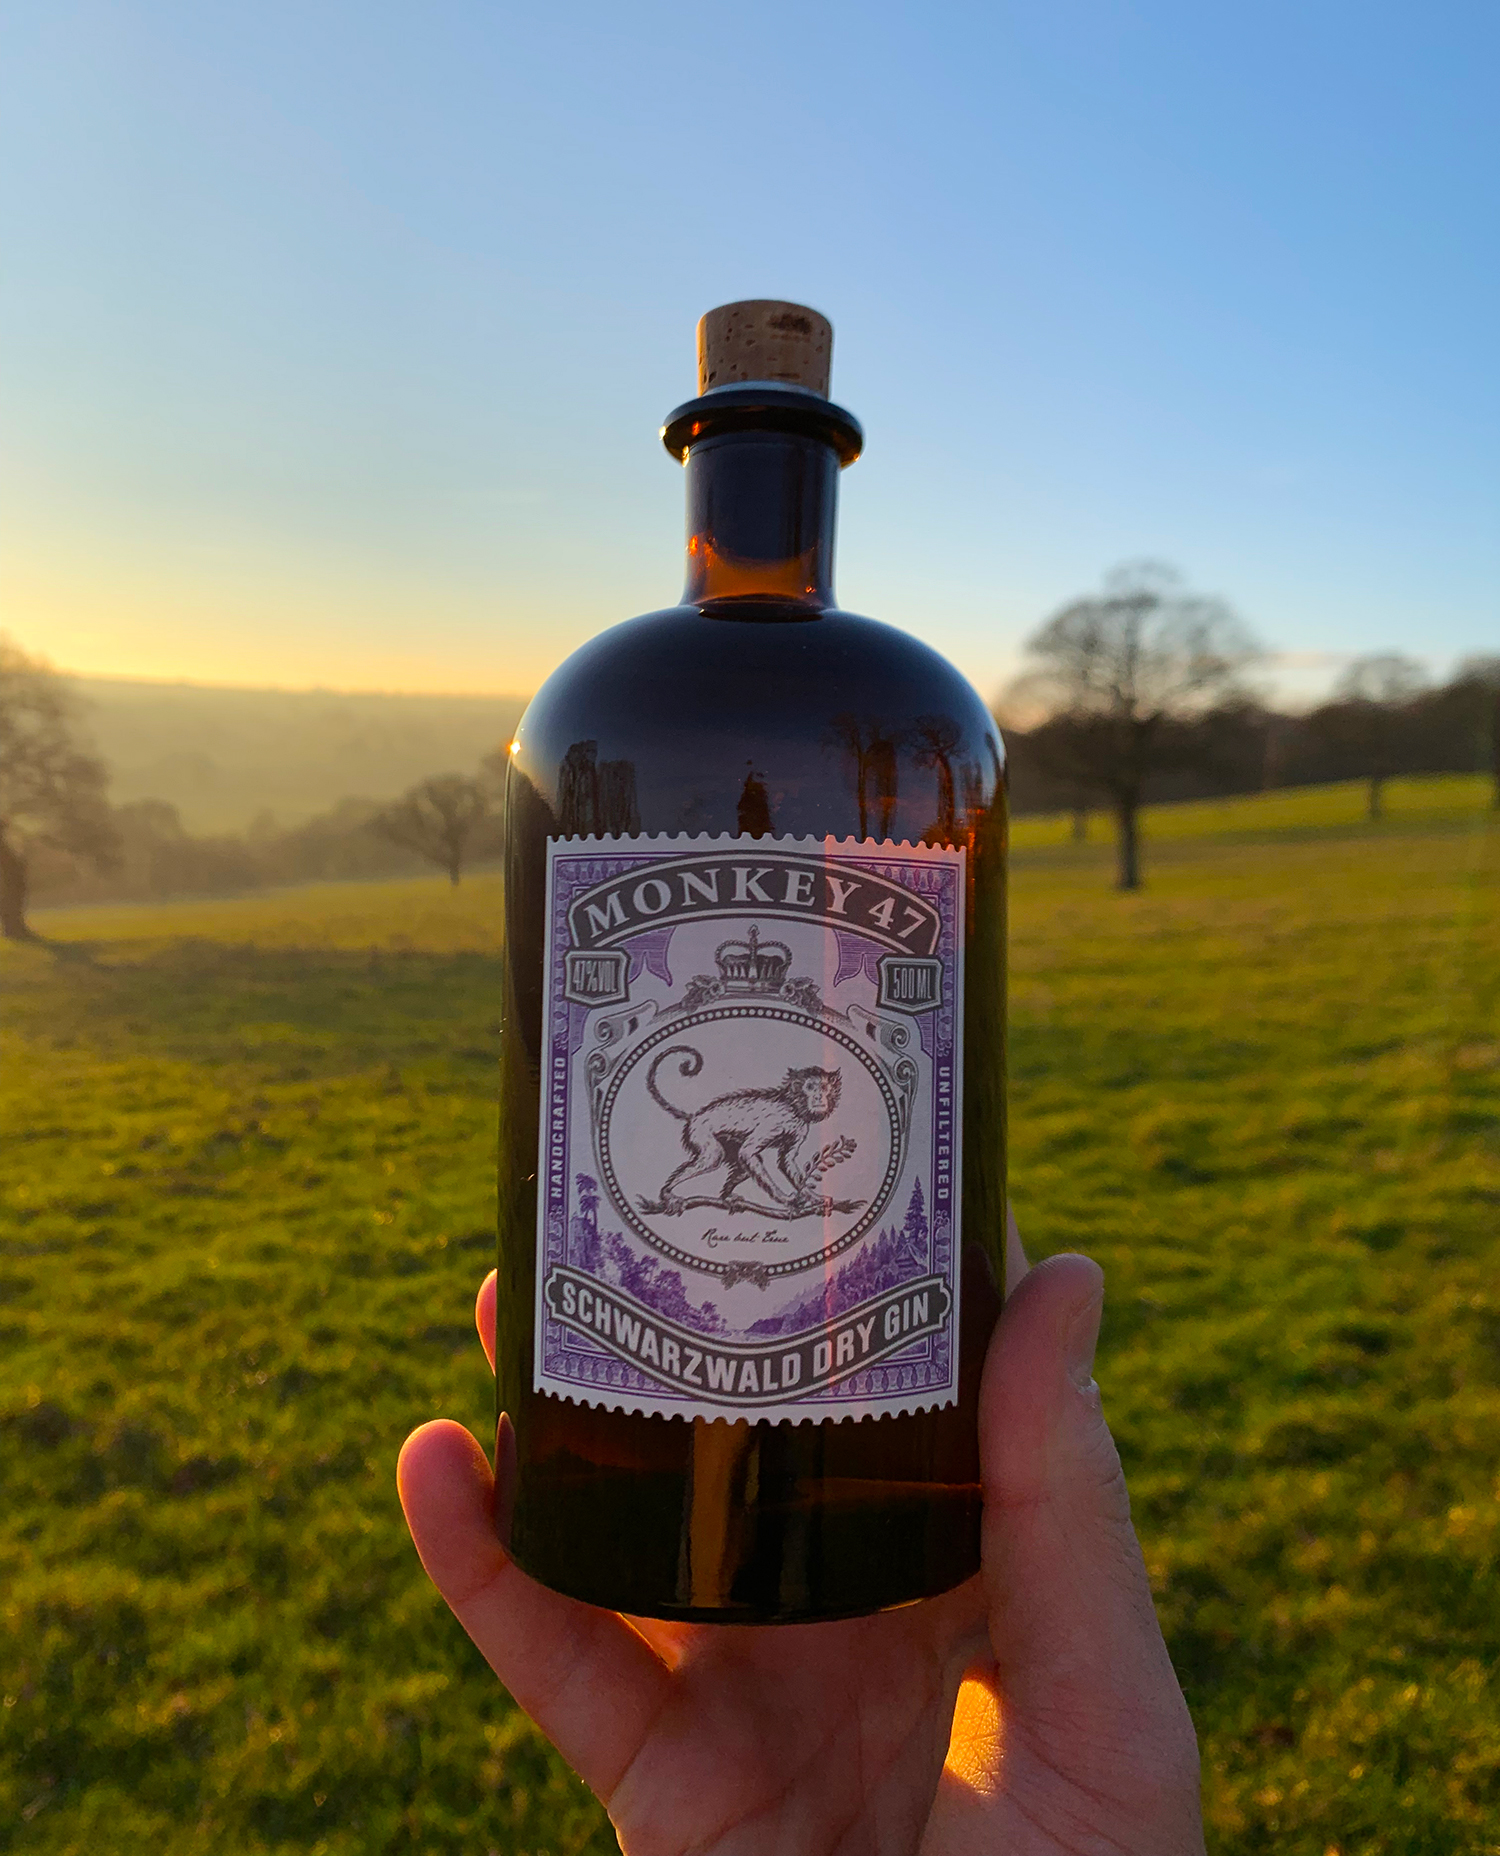 Monkey 47 Schwarzwald Dry Gin Review - The Gold Standard - Gin & Tonicly